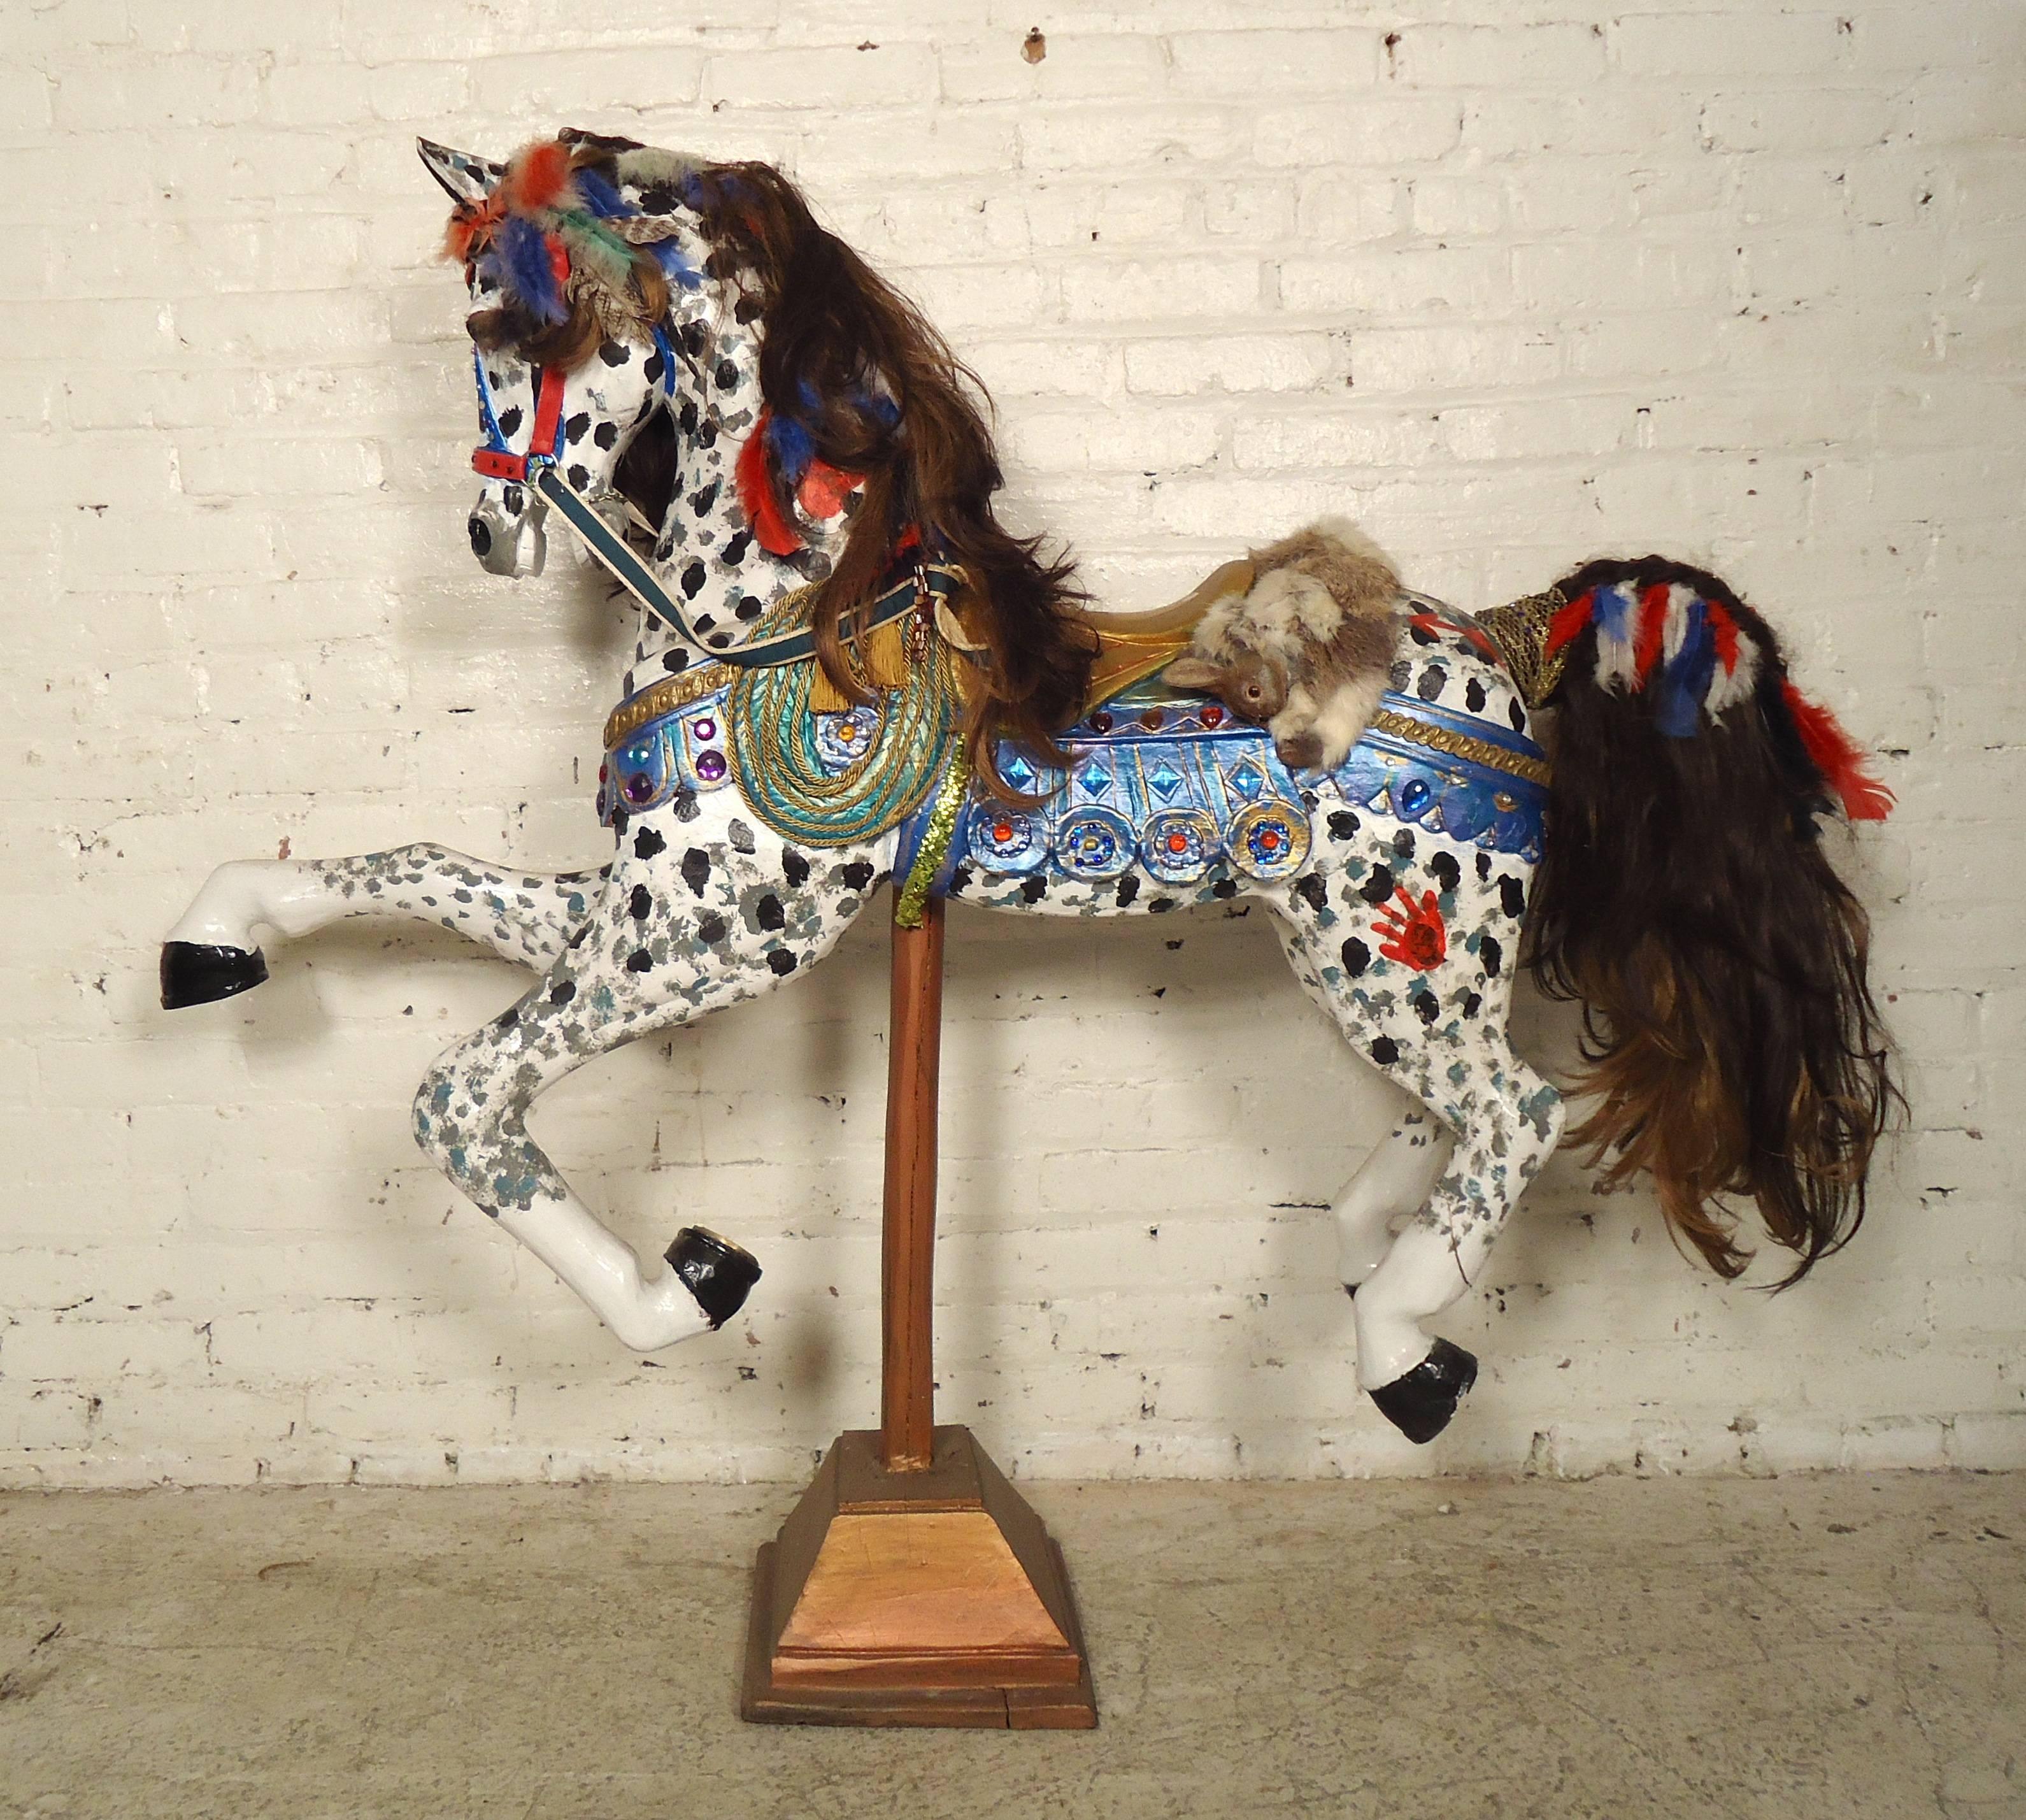 Vintage modern hand-painted wooden horse in the style of a carousel horse. 

Please confirm item location (NY or NJ).